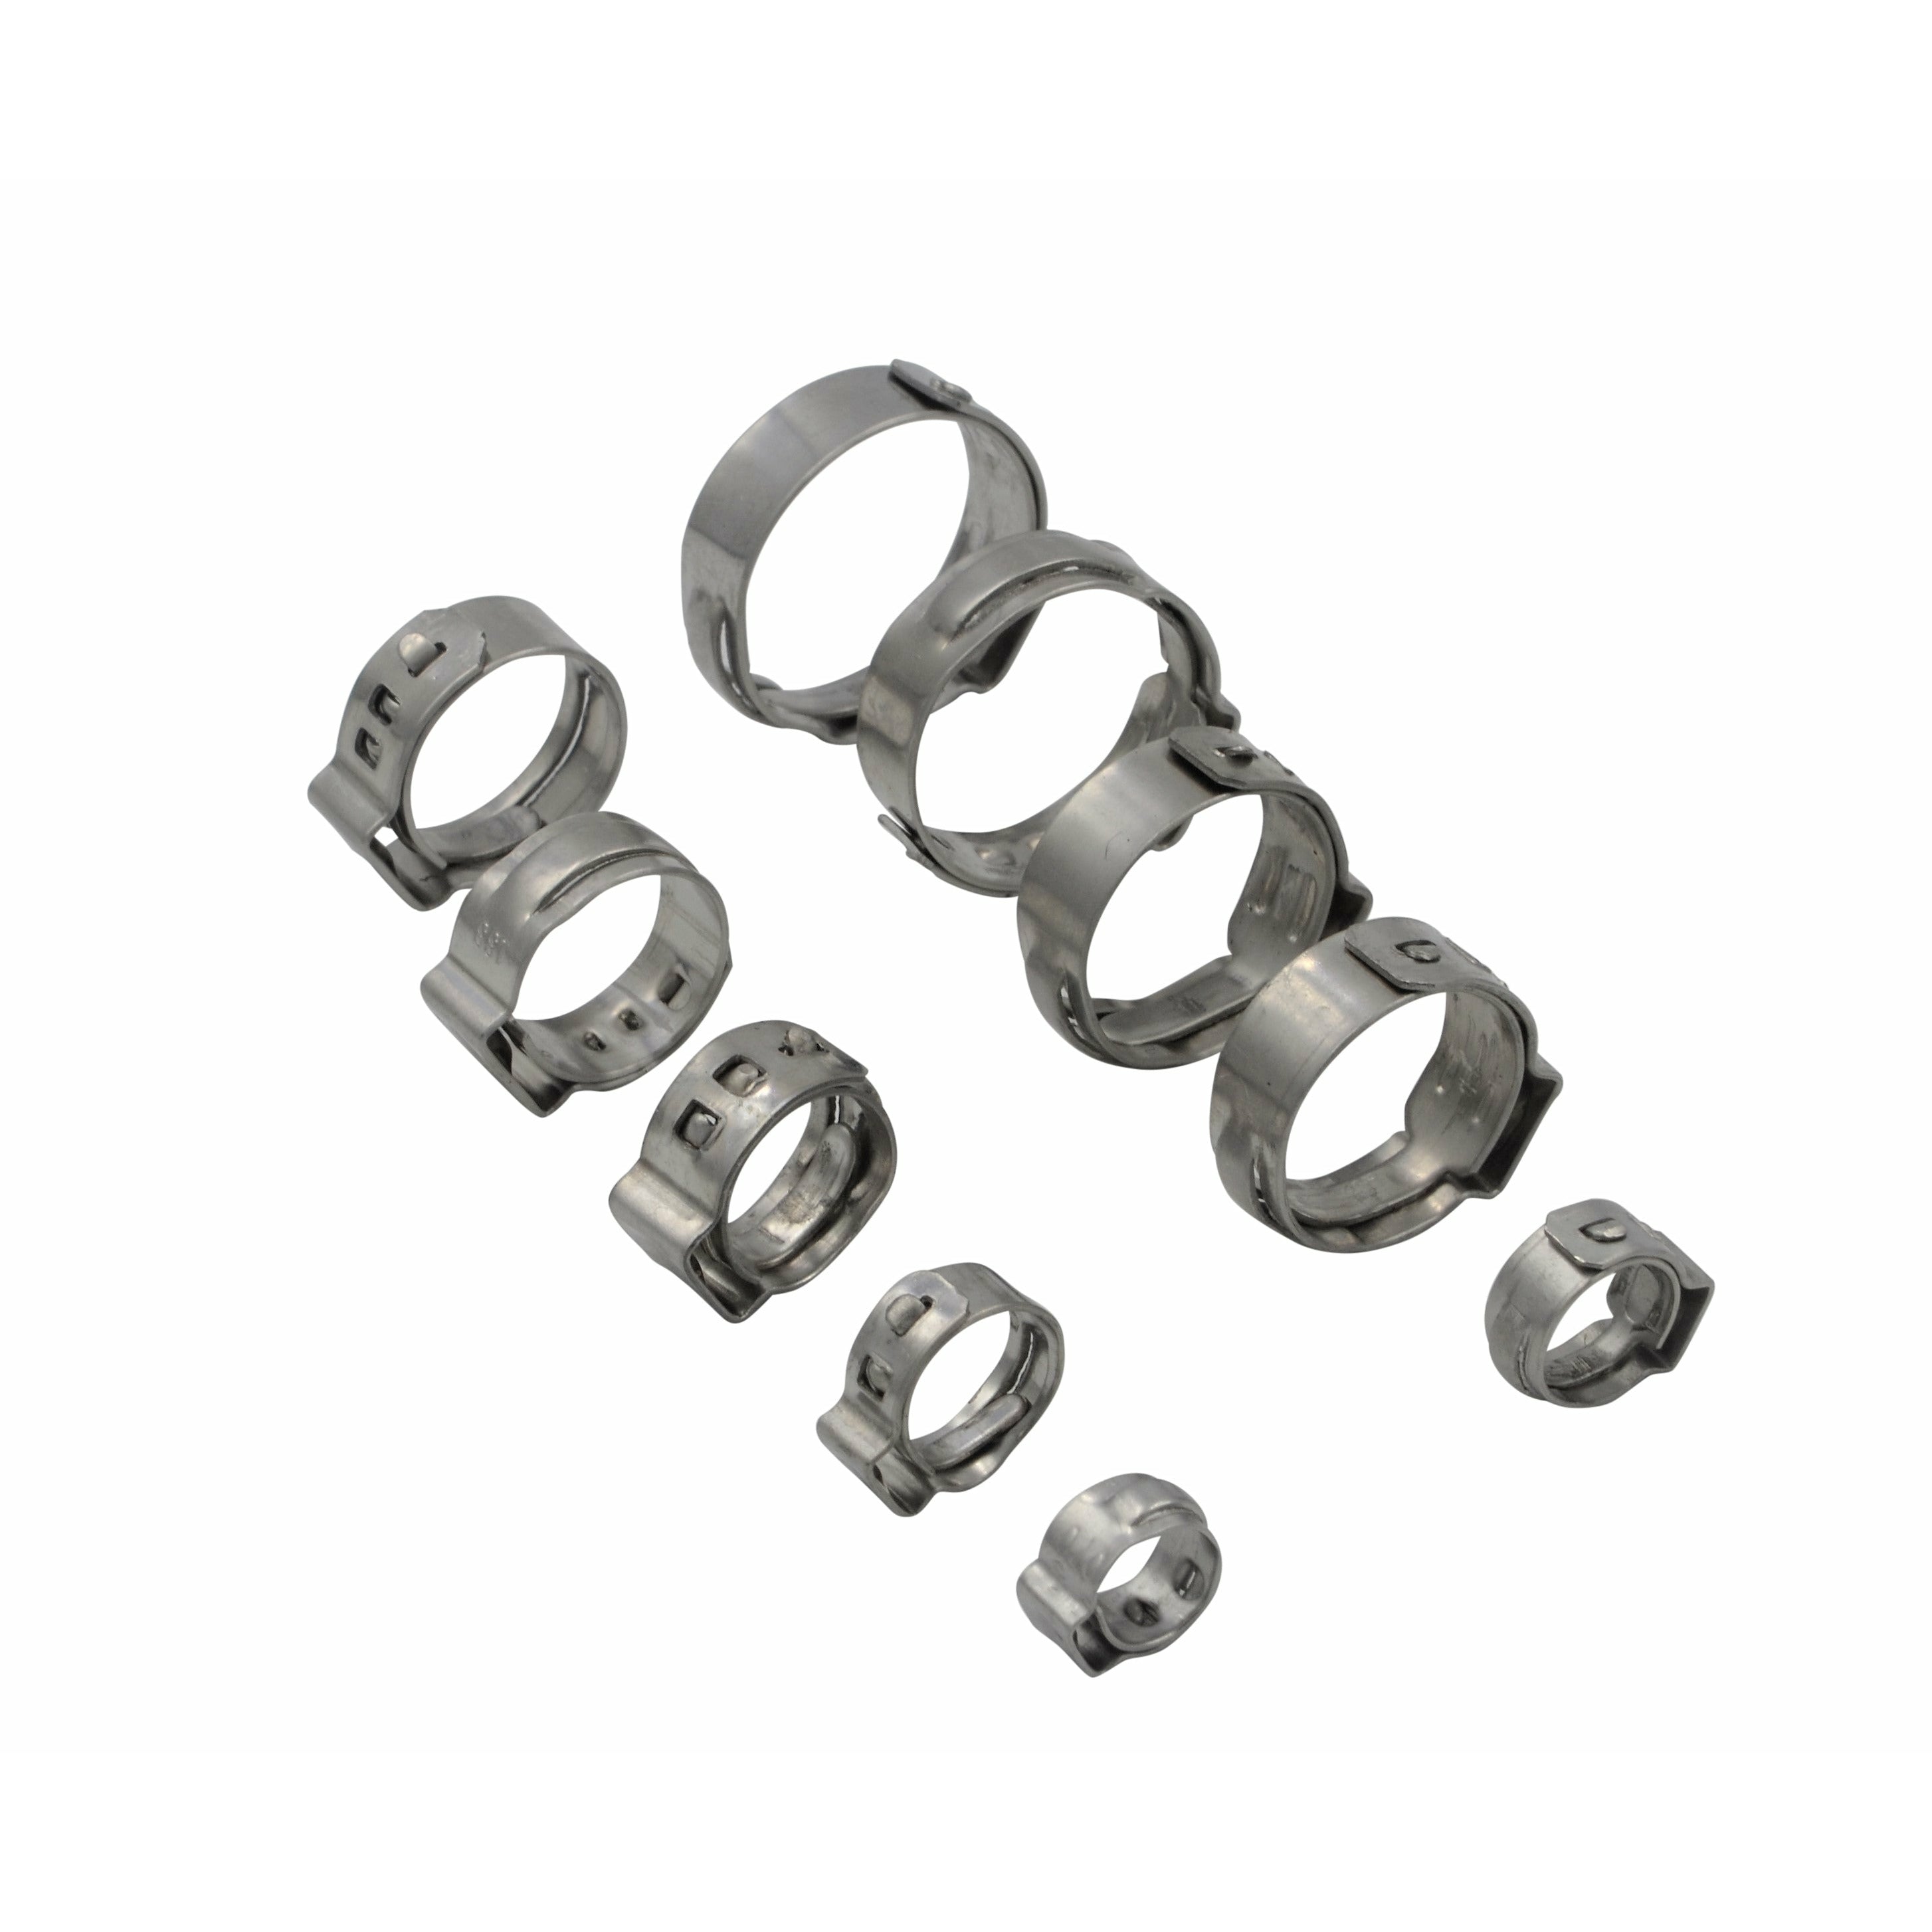 100 Piece 304 Stainless Steel 10.8-13.3mm Ear Hose Clamp Grab Kit Assortment